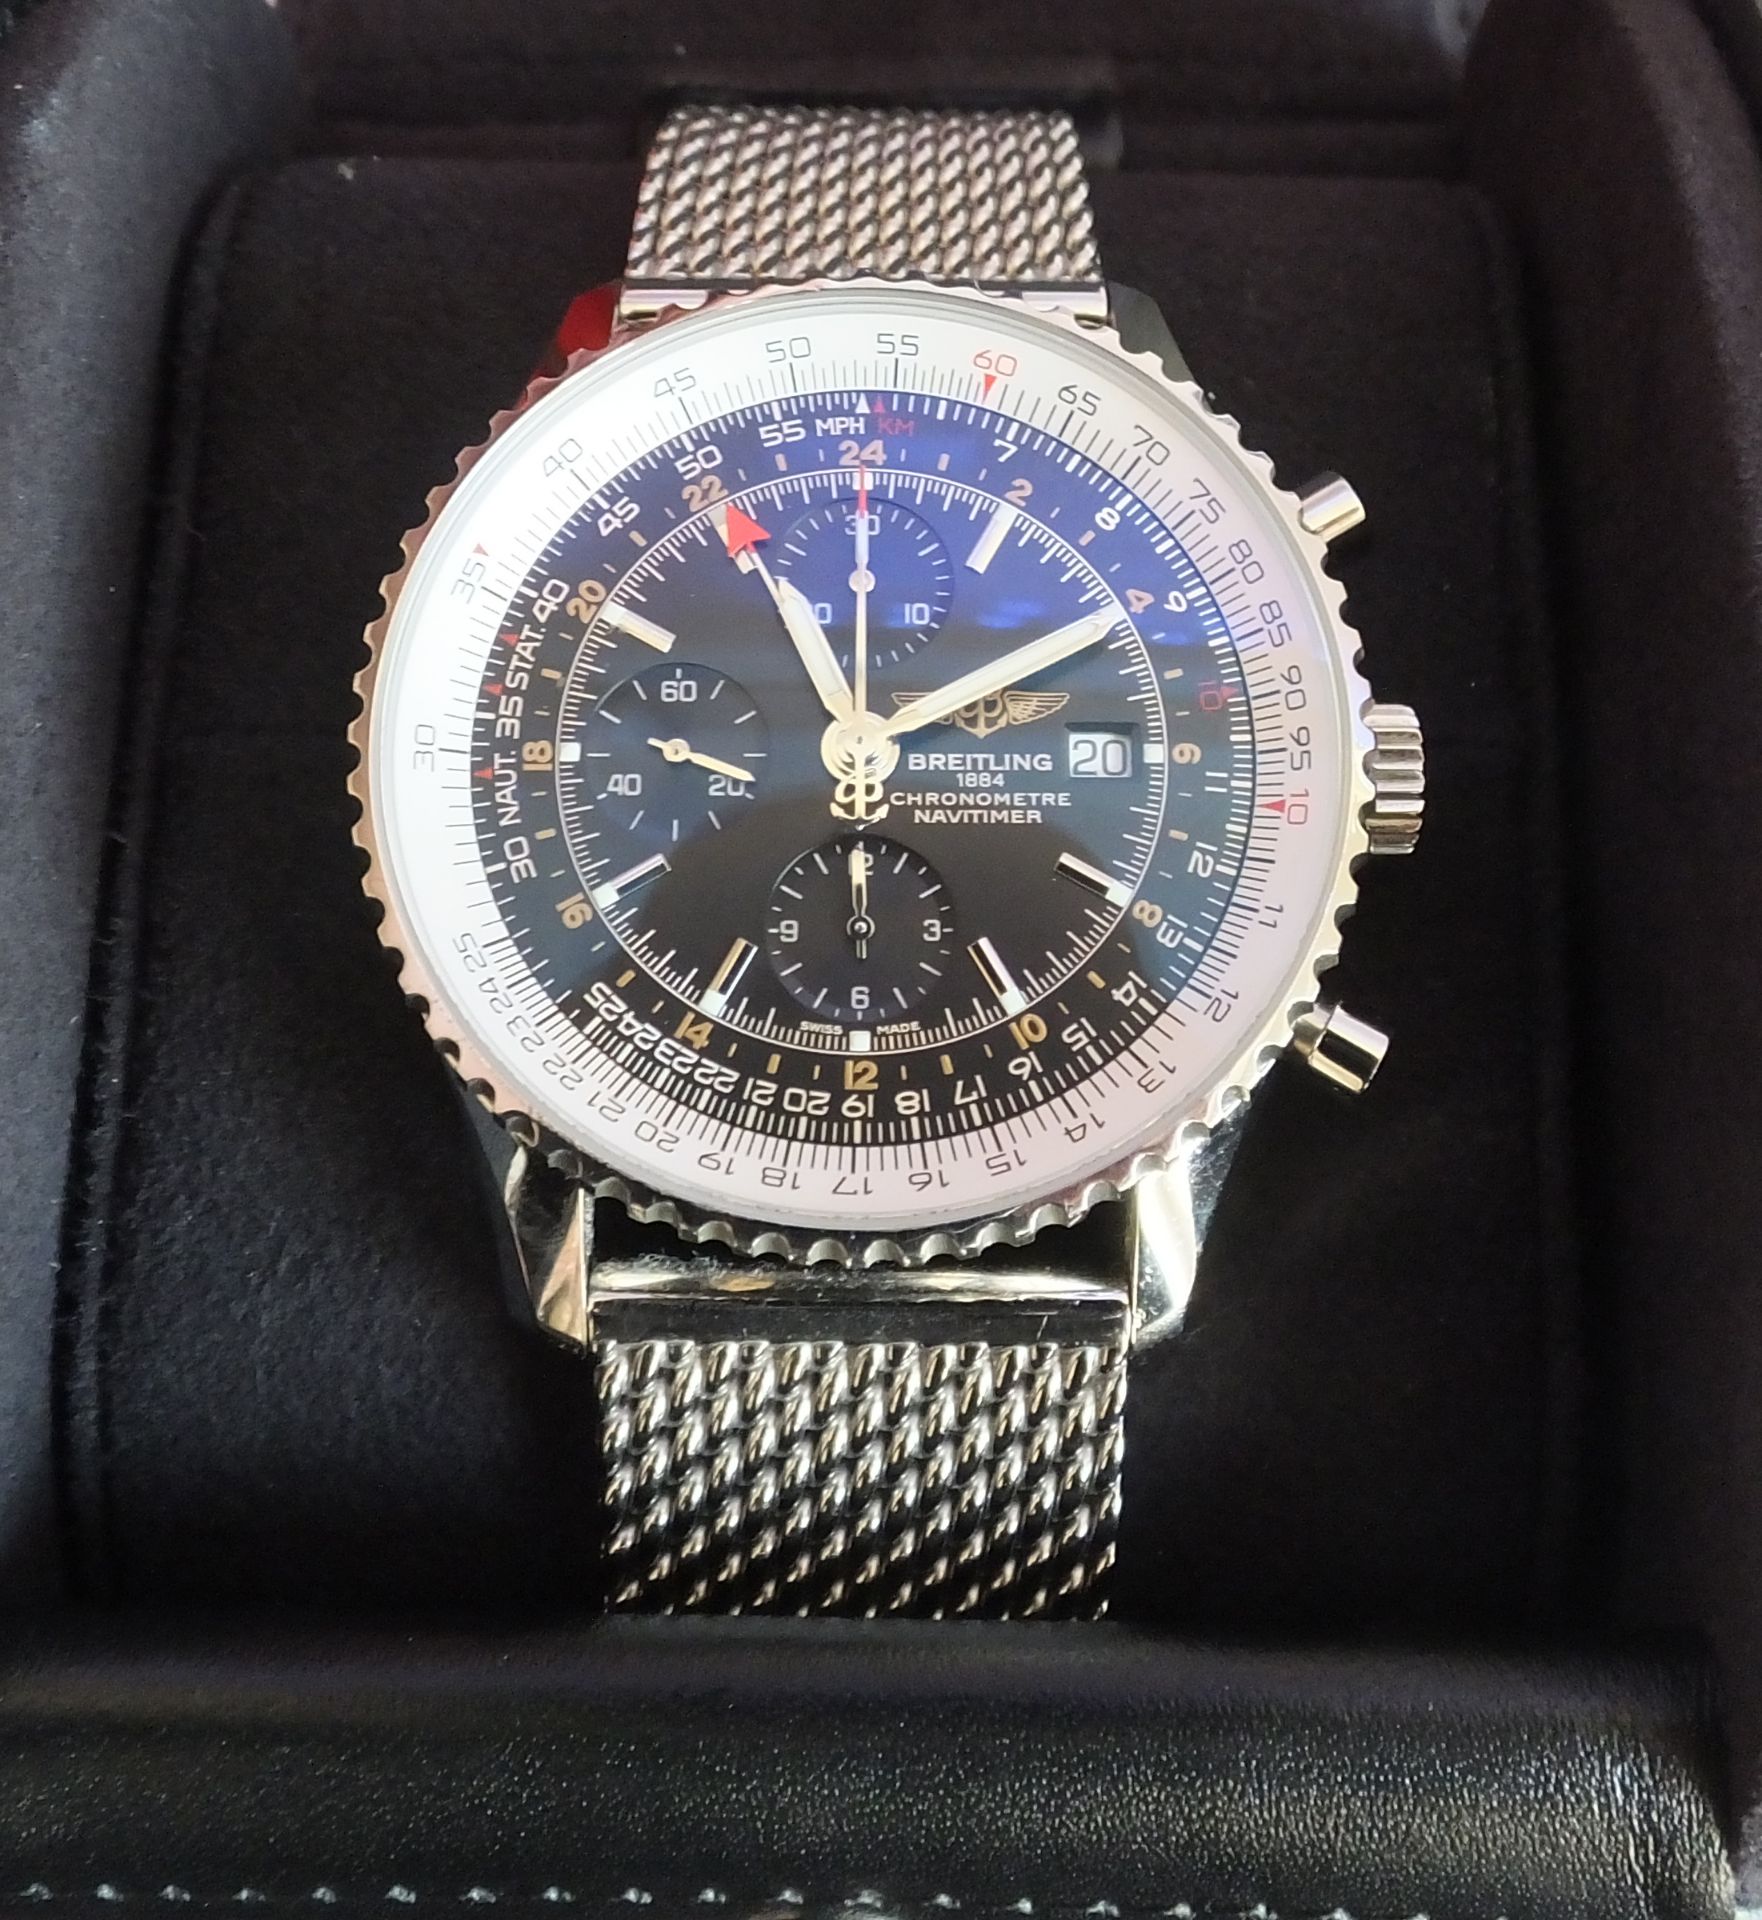 A Very Rare Breitling Navitimer World with Box, papers, and 5 year electronic world wide waranty. - Image 4 of 4